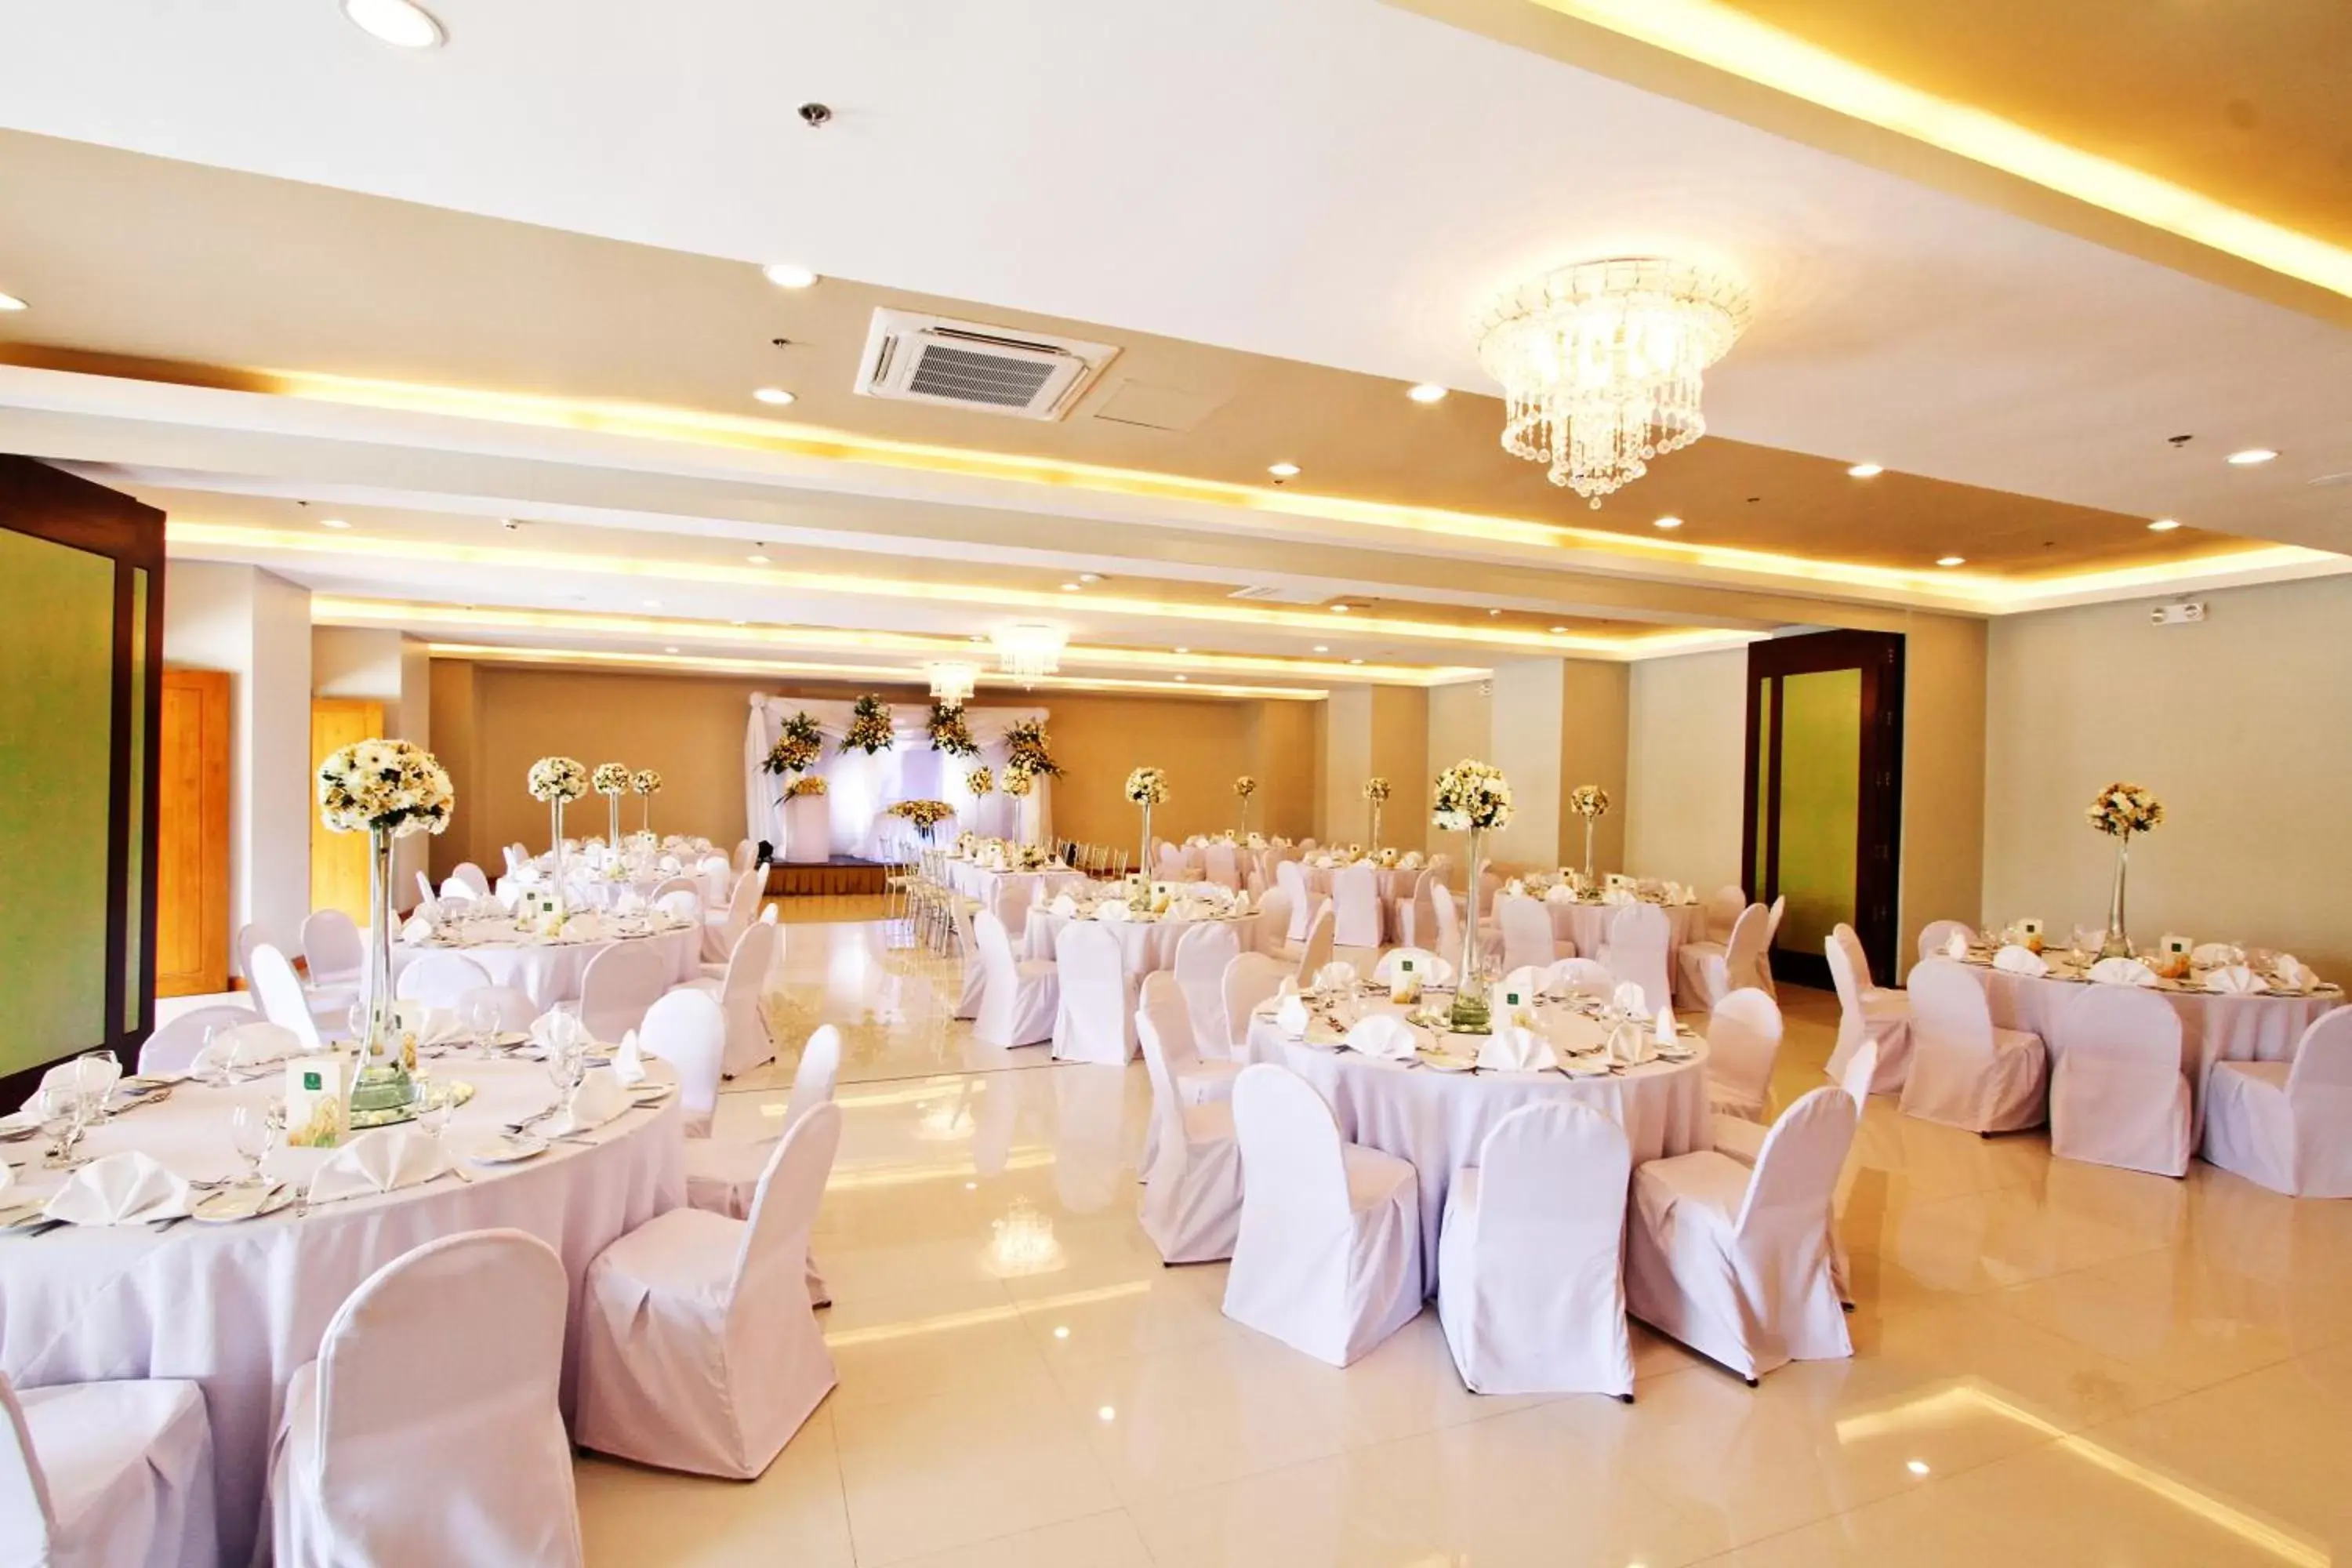 Banquet/Function facilities, Banquet Facilities in The Harvest Hotel Managed by HII